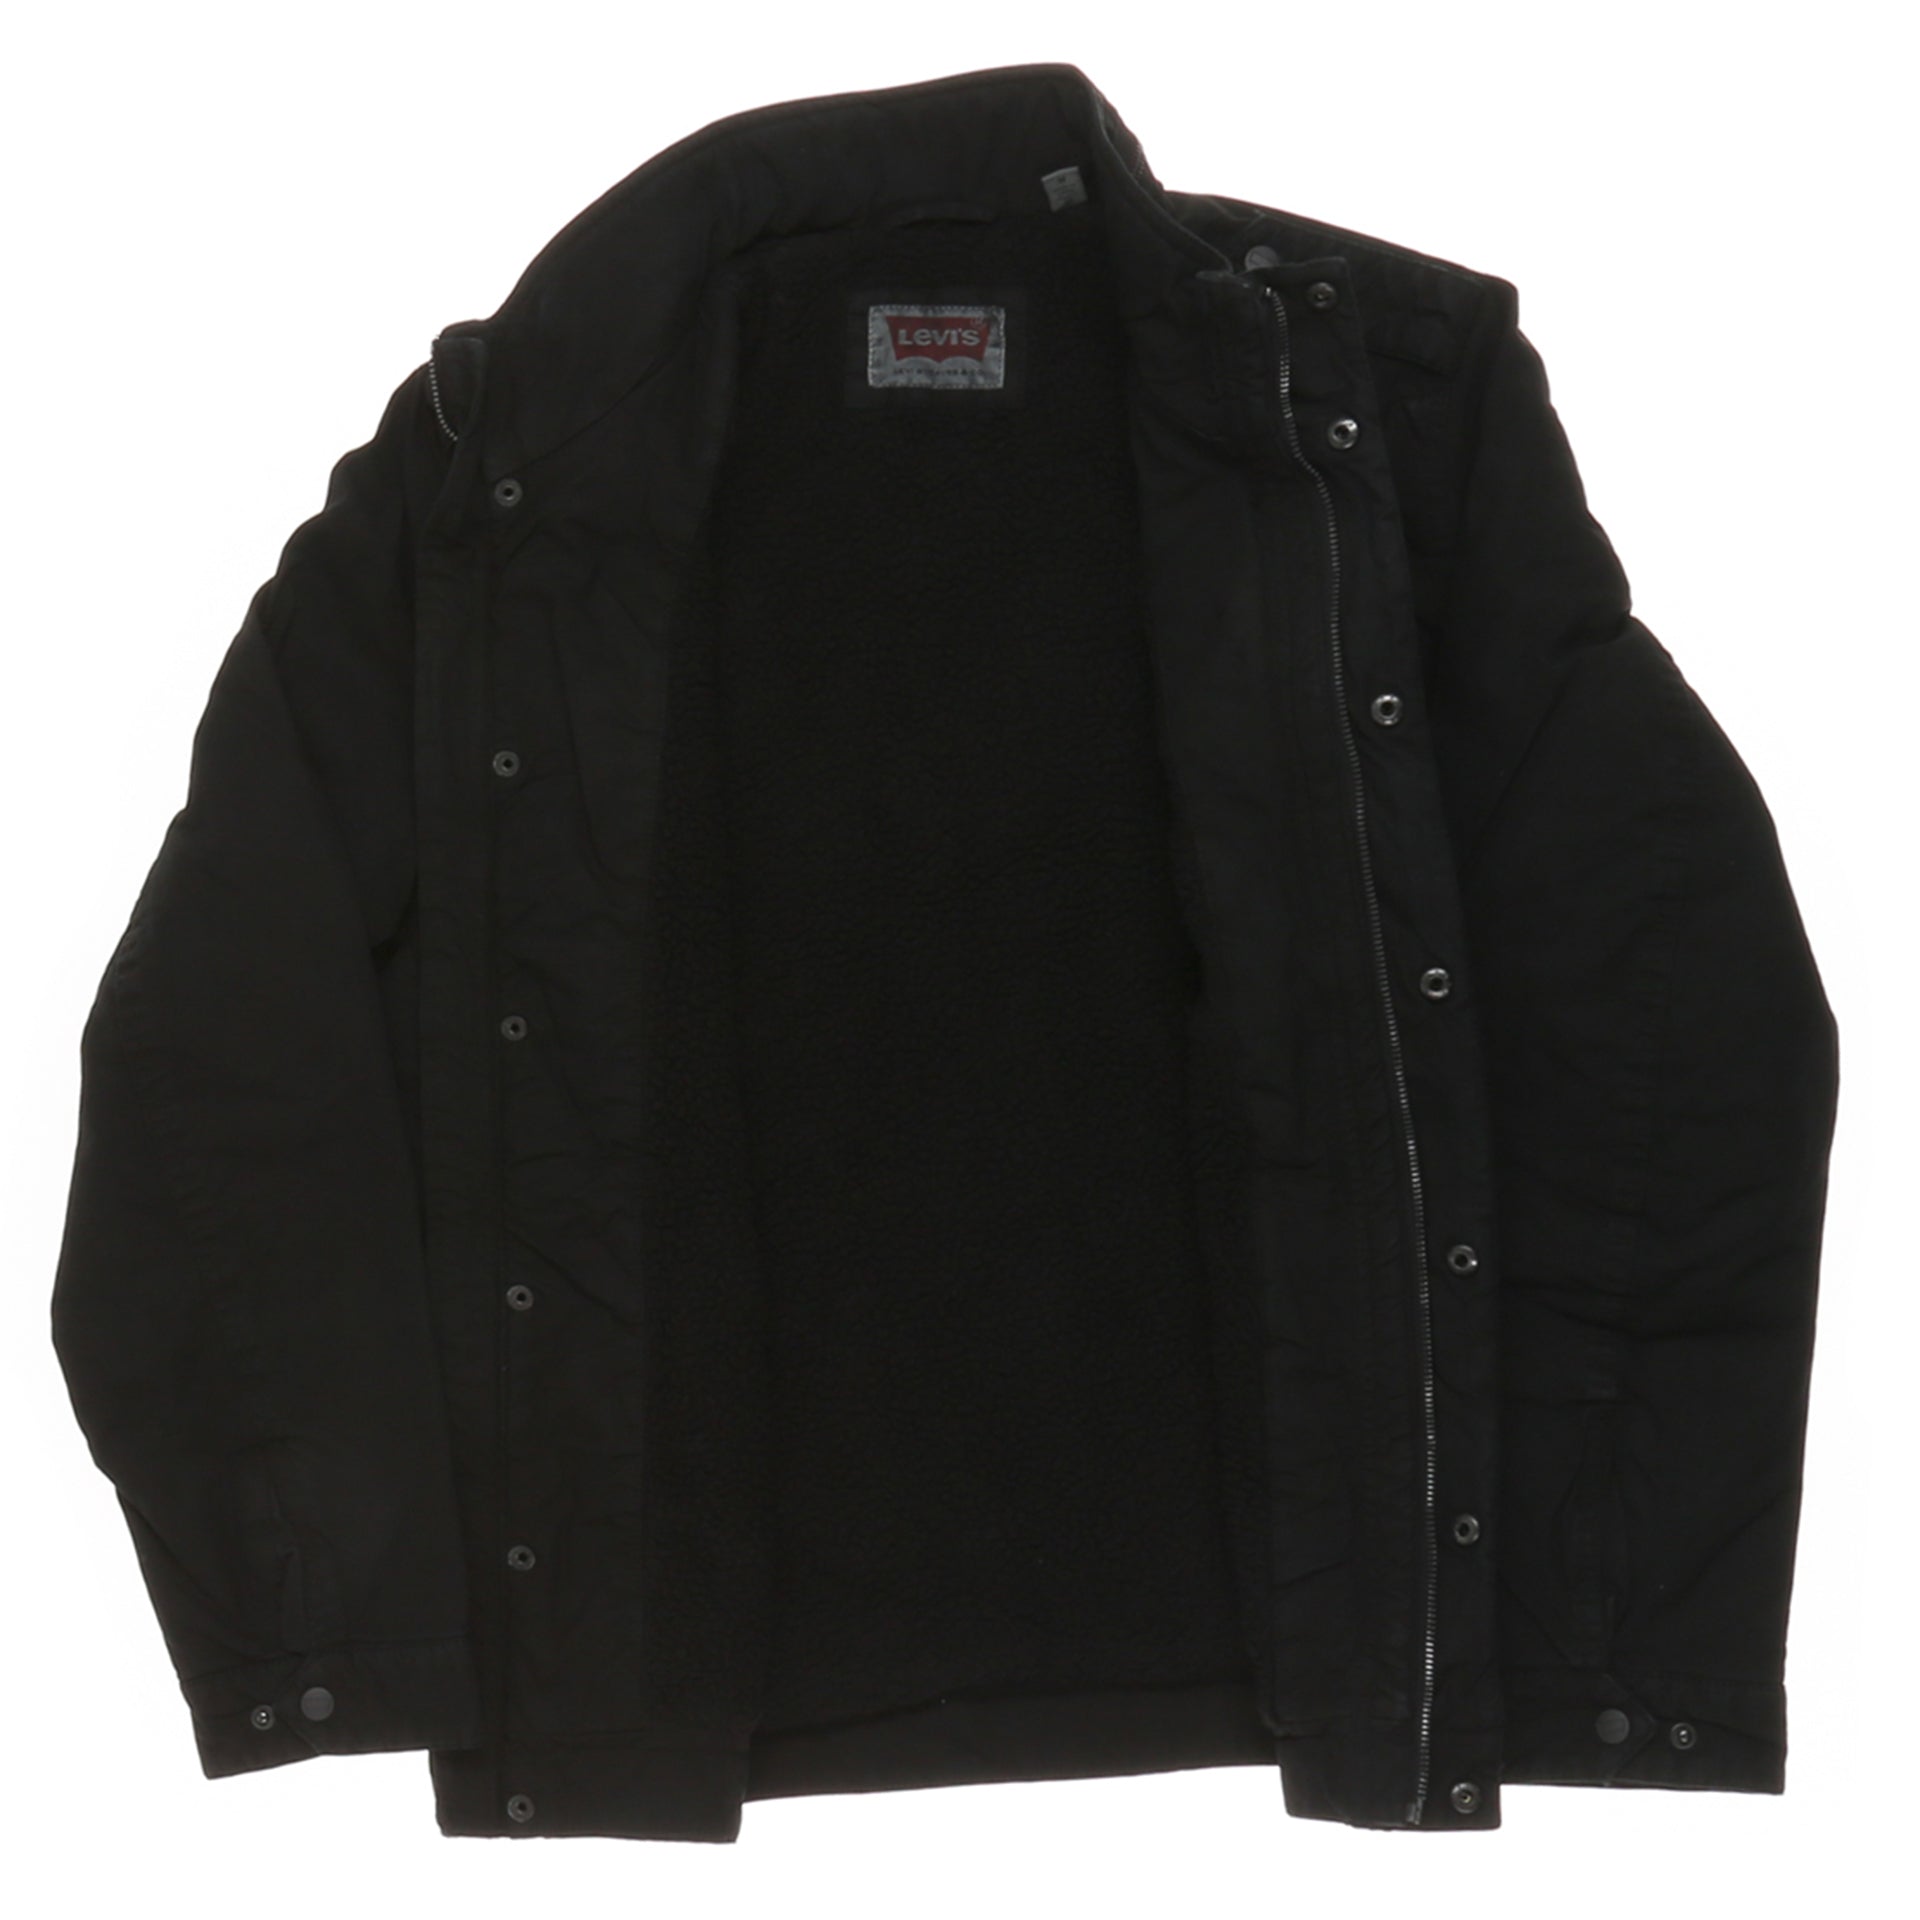 Levi's Washed Cotton Sherpa Lined Military Jacket - Black - New Star